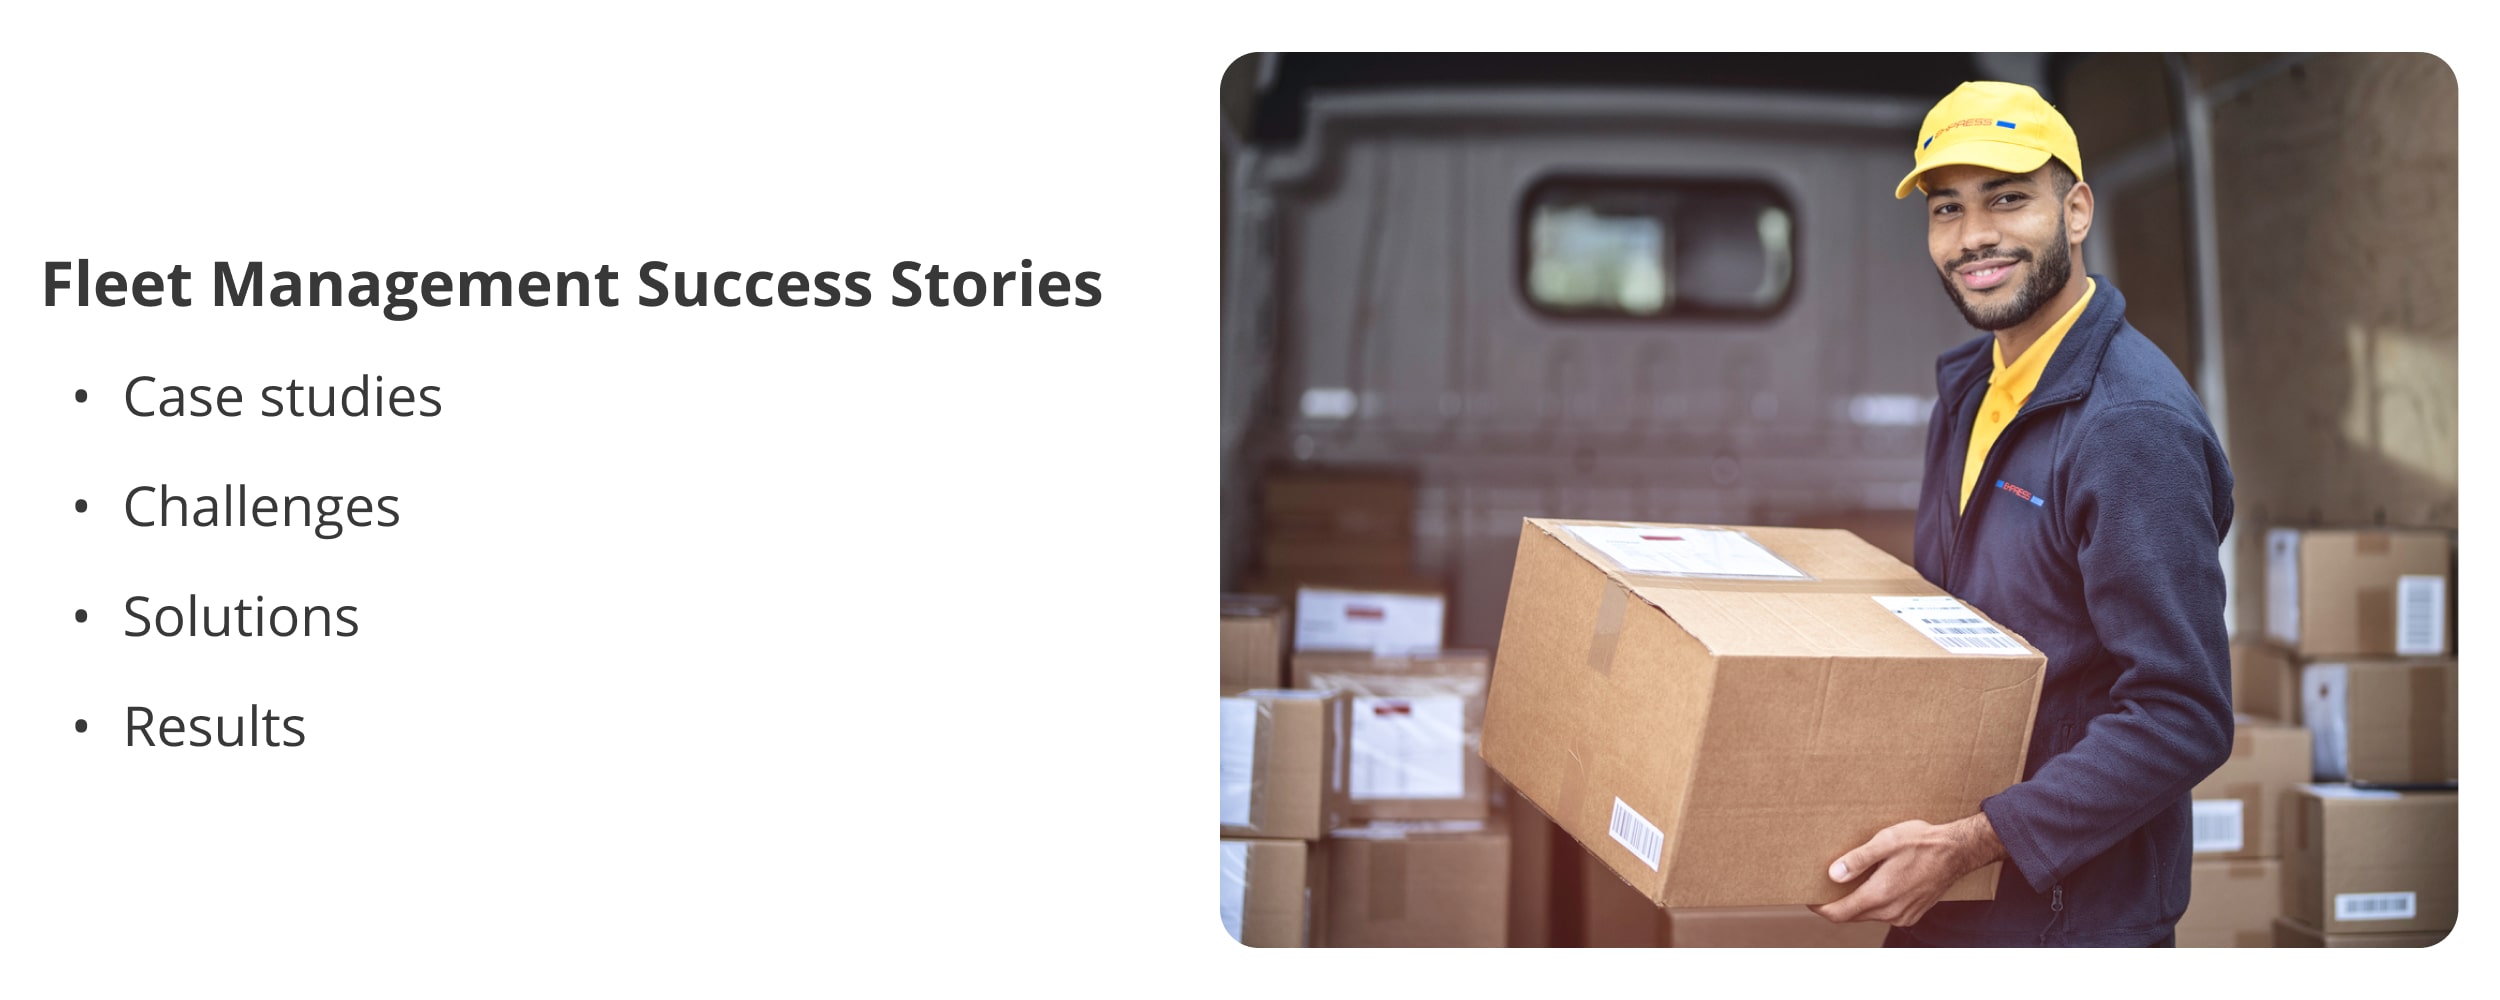 Success stories from fleet managers that improved fleet profitability and fleet efficiency.